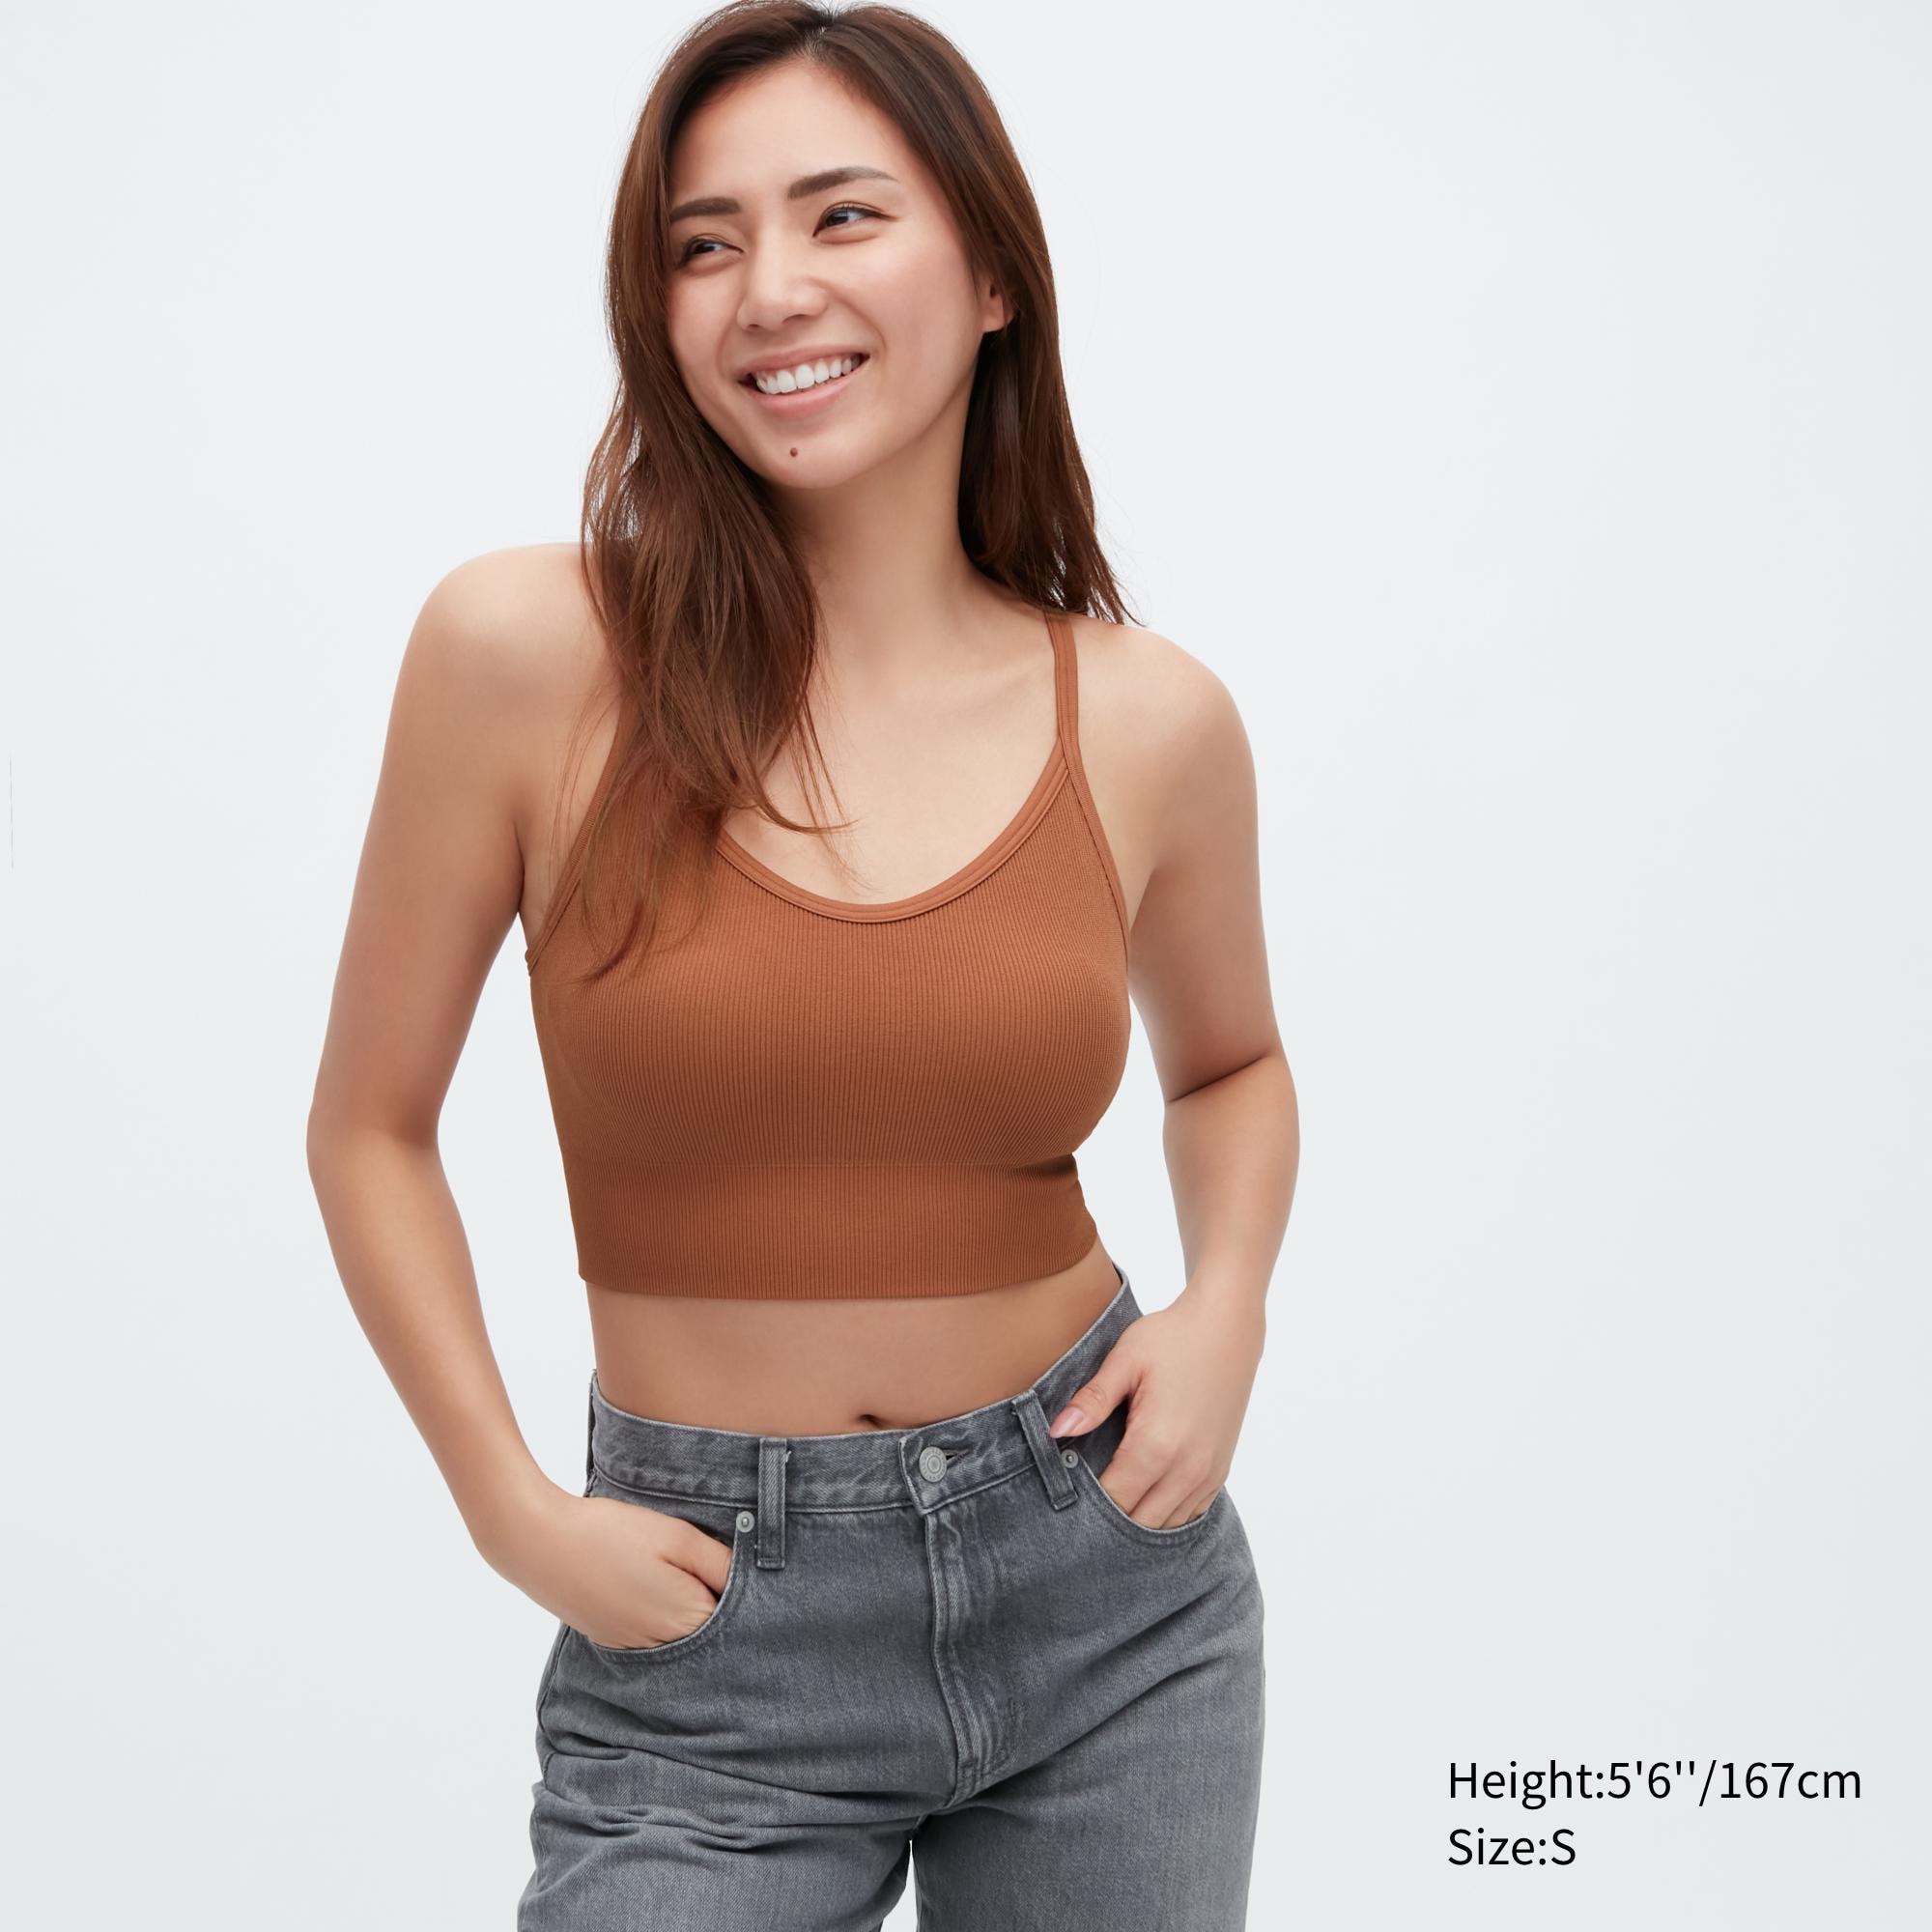 Shop looks for「Seamless Half Camisole Bra Top、AIRism UV Protection ...